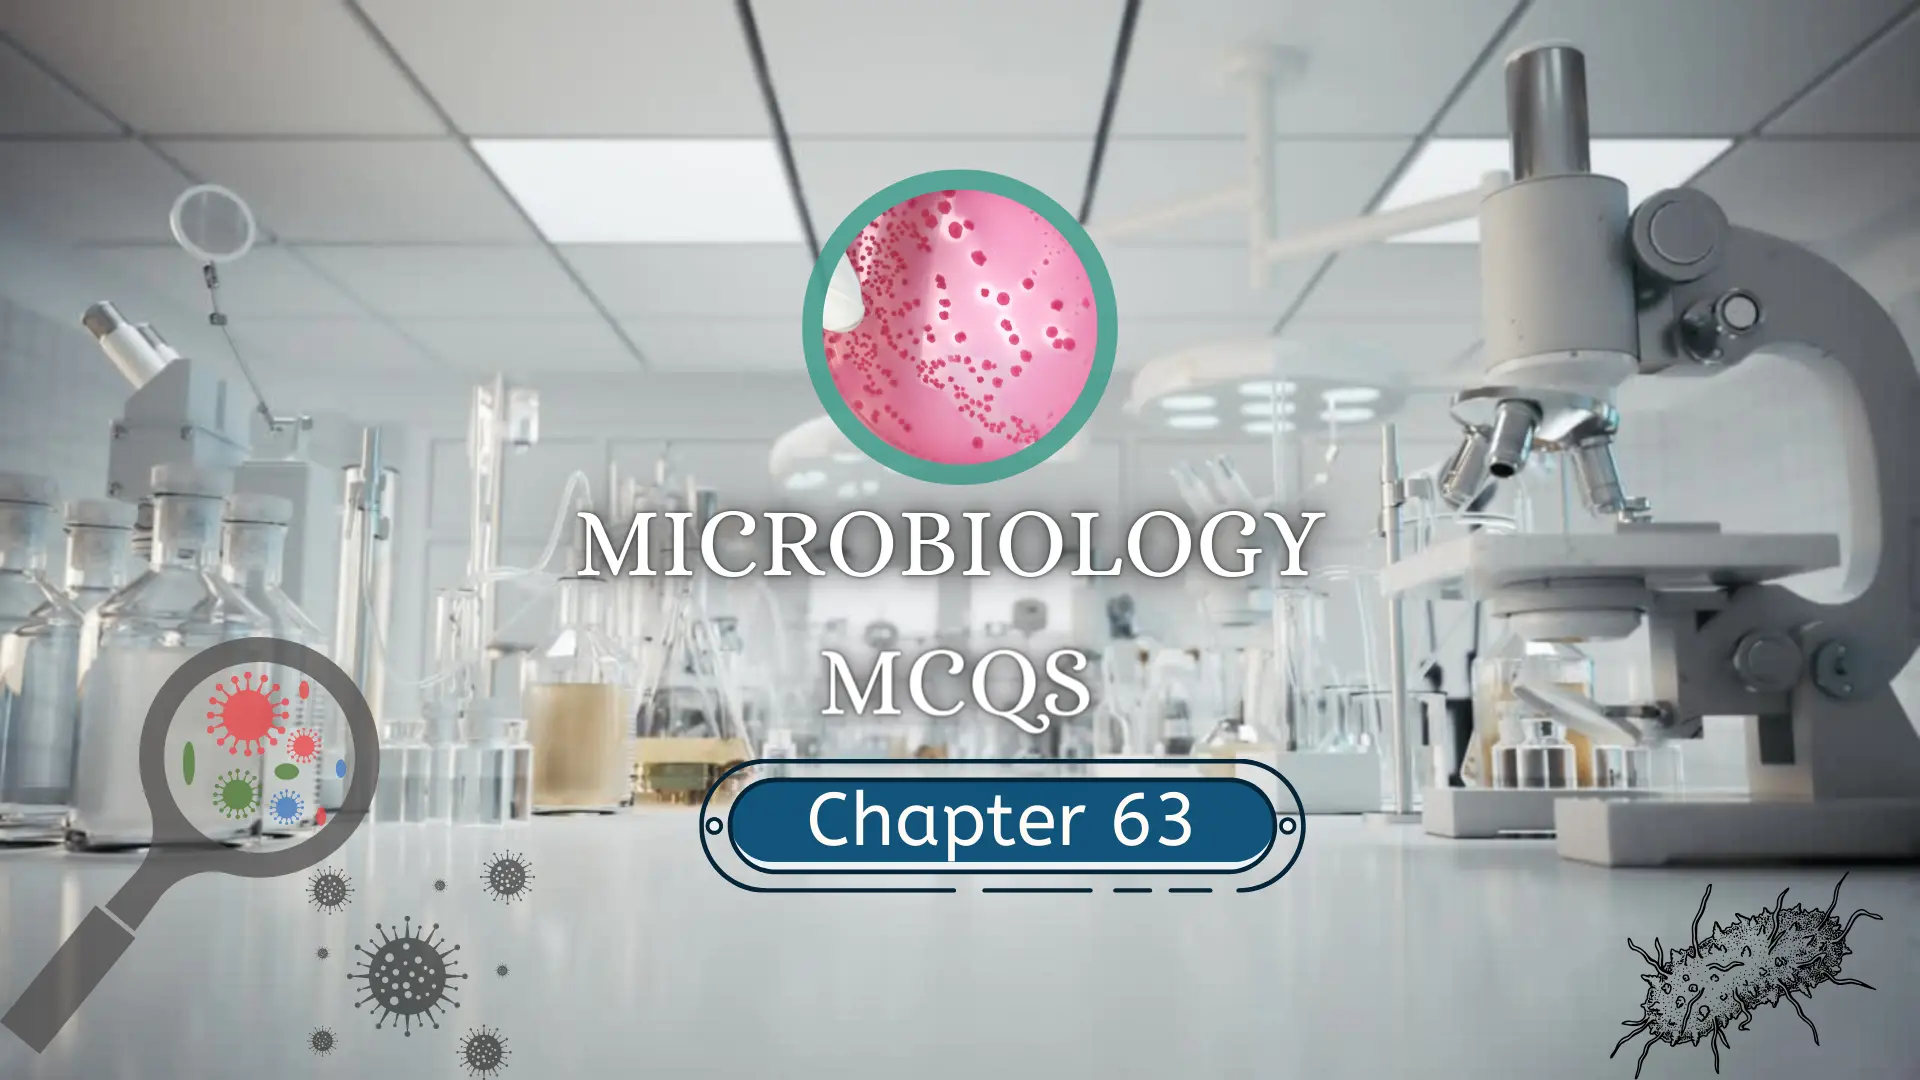 Microbiology MCQs Chapter 63